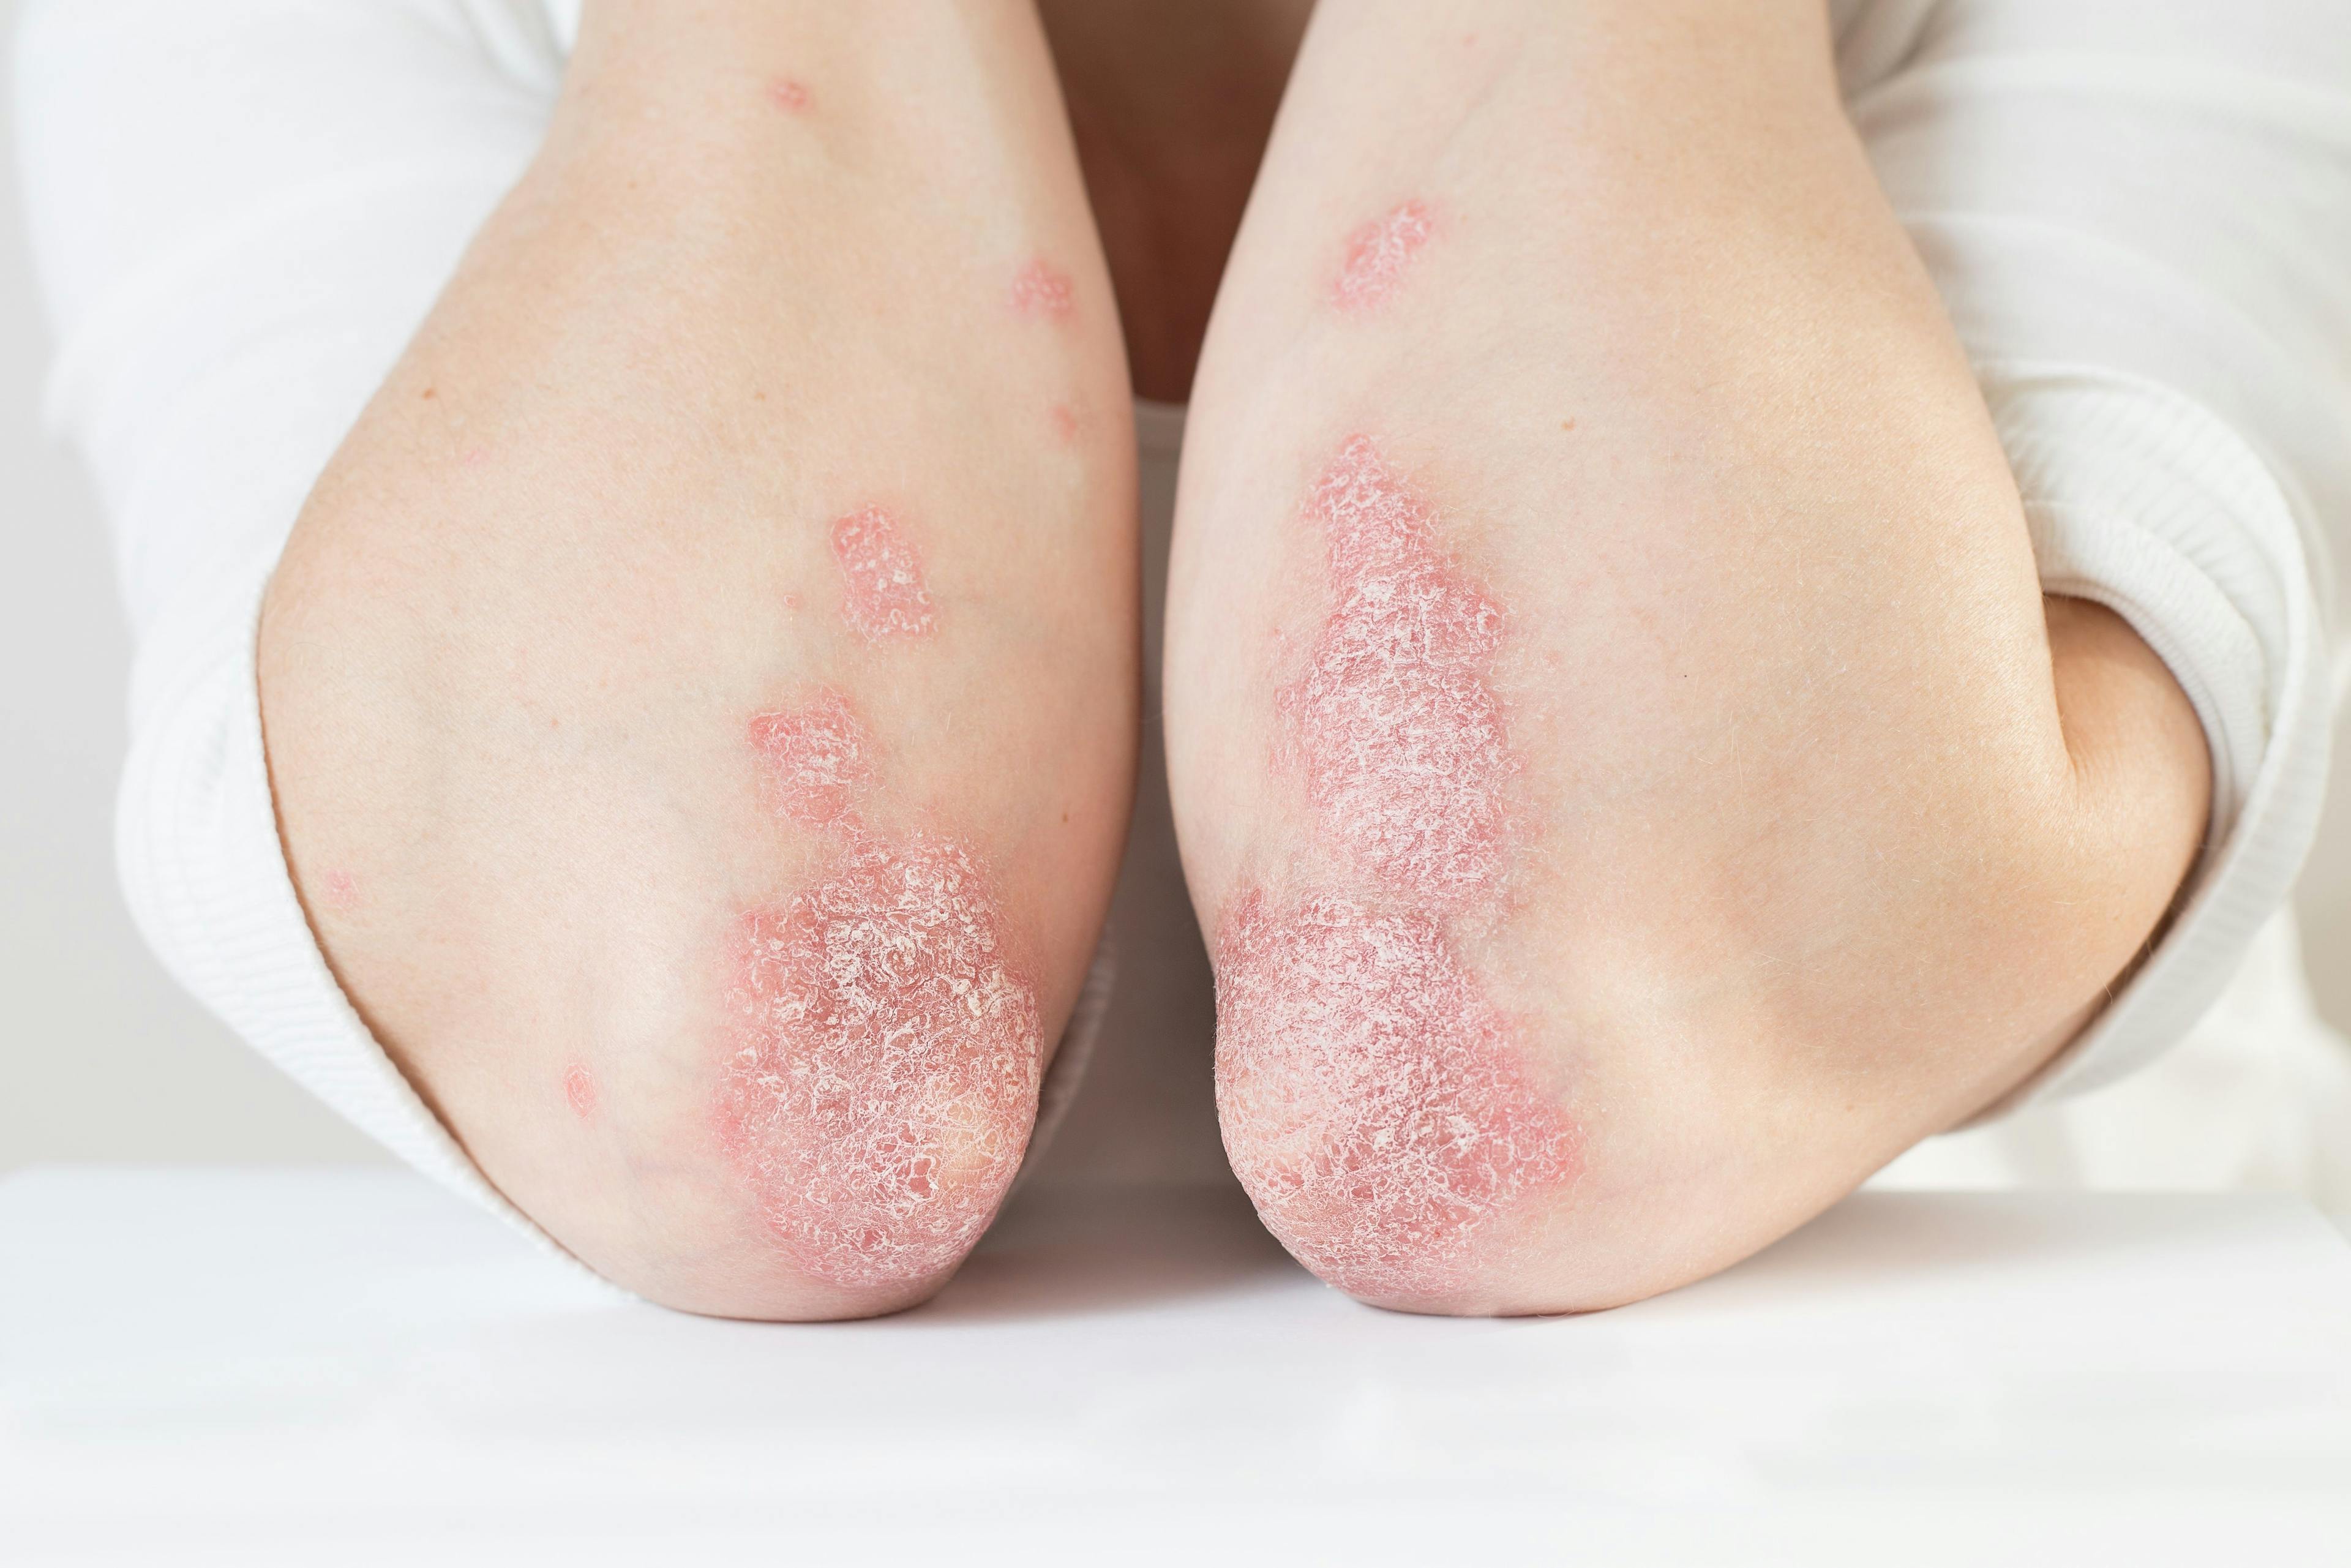 Roflumilast As a Positive Treatment Option for Psoriasis